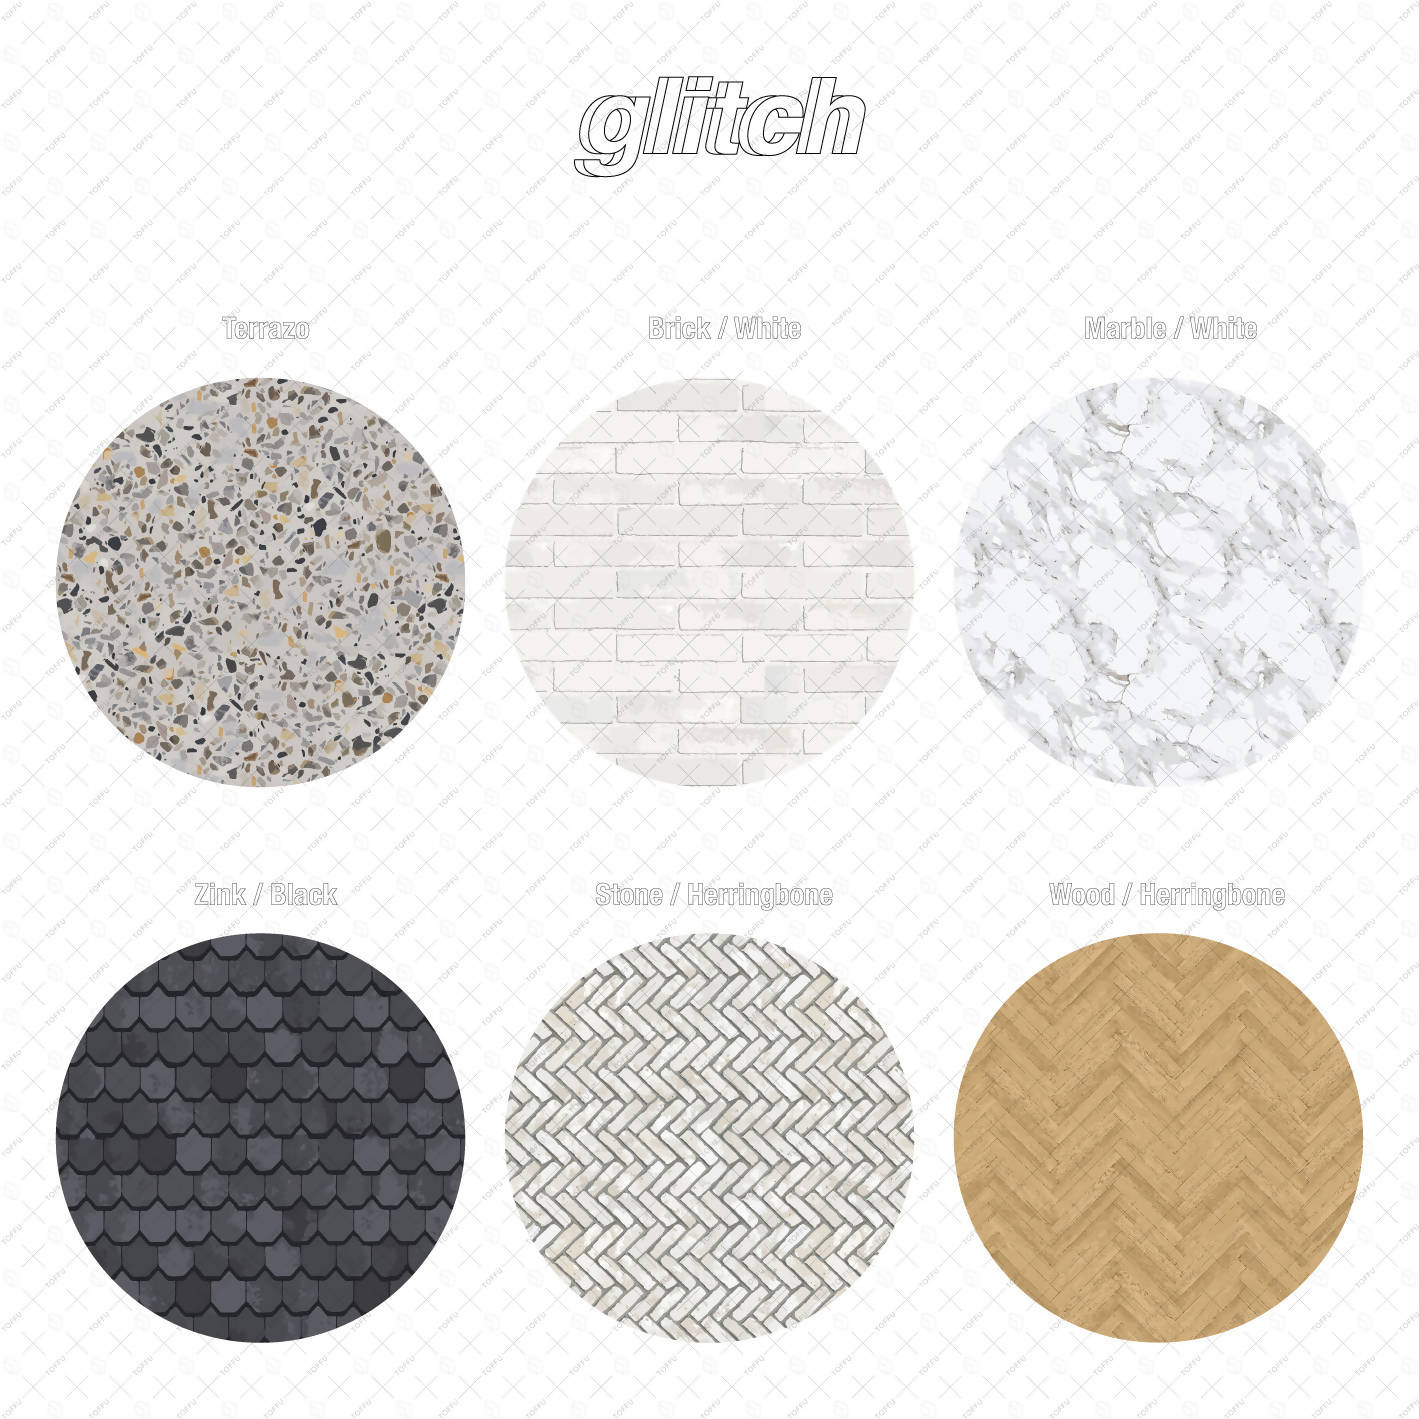 Swatch Architectural Textures 5 AI | Toffu Co